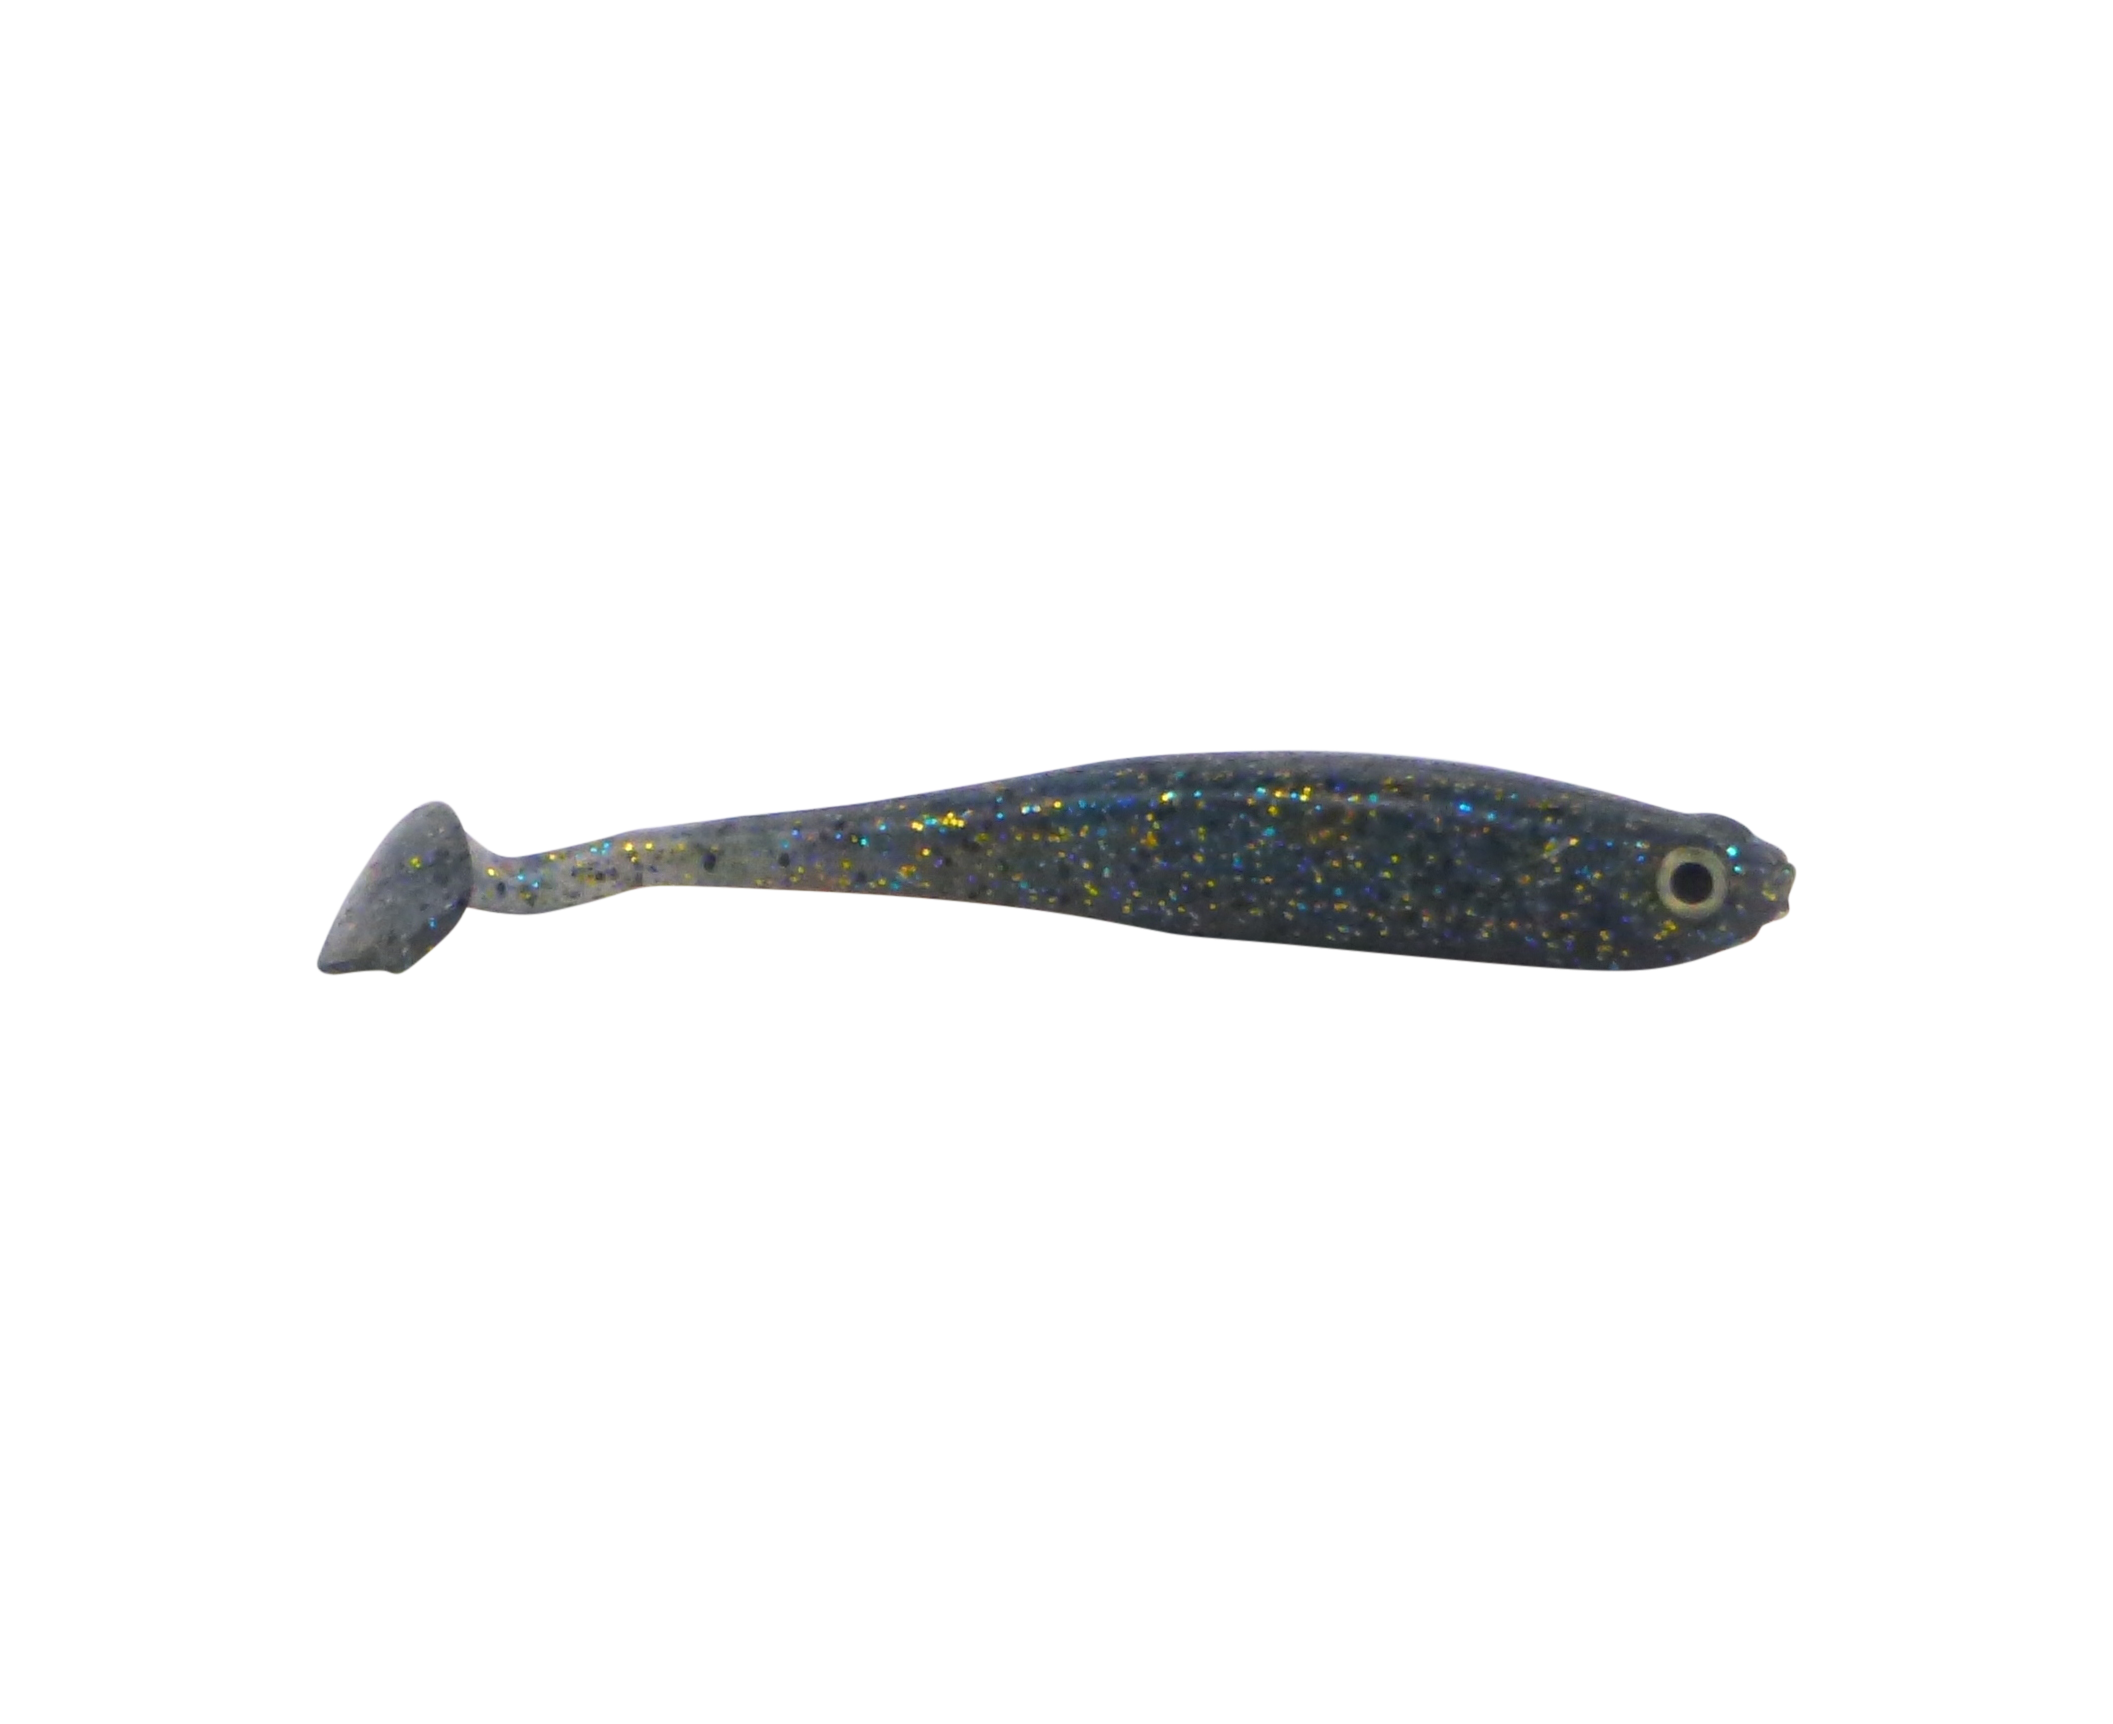 Swimerz Soft Shad 100mm Paddle Tail lure, Red Bug, 6 pack – Blue